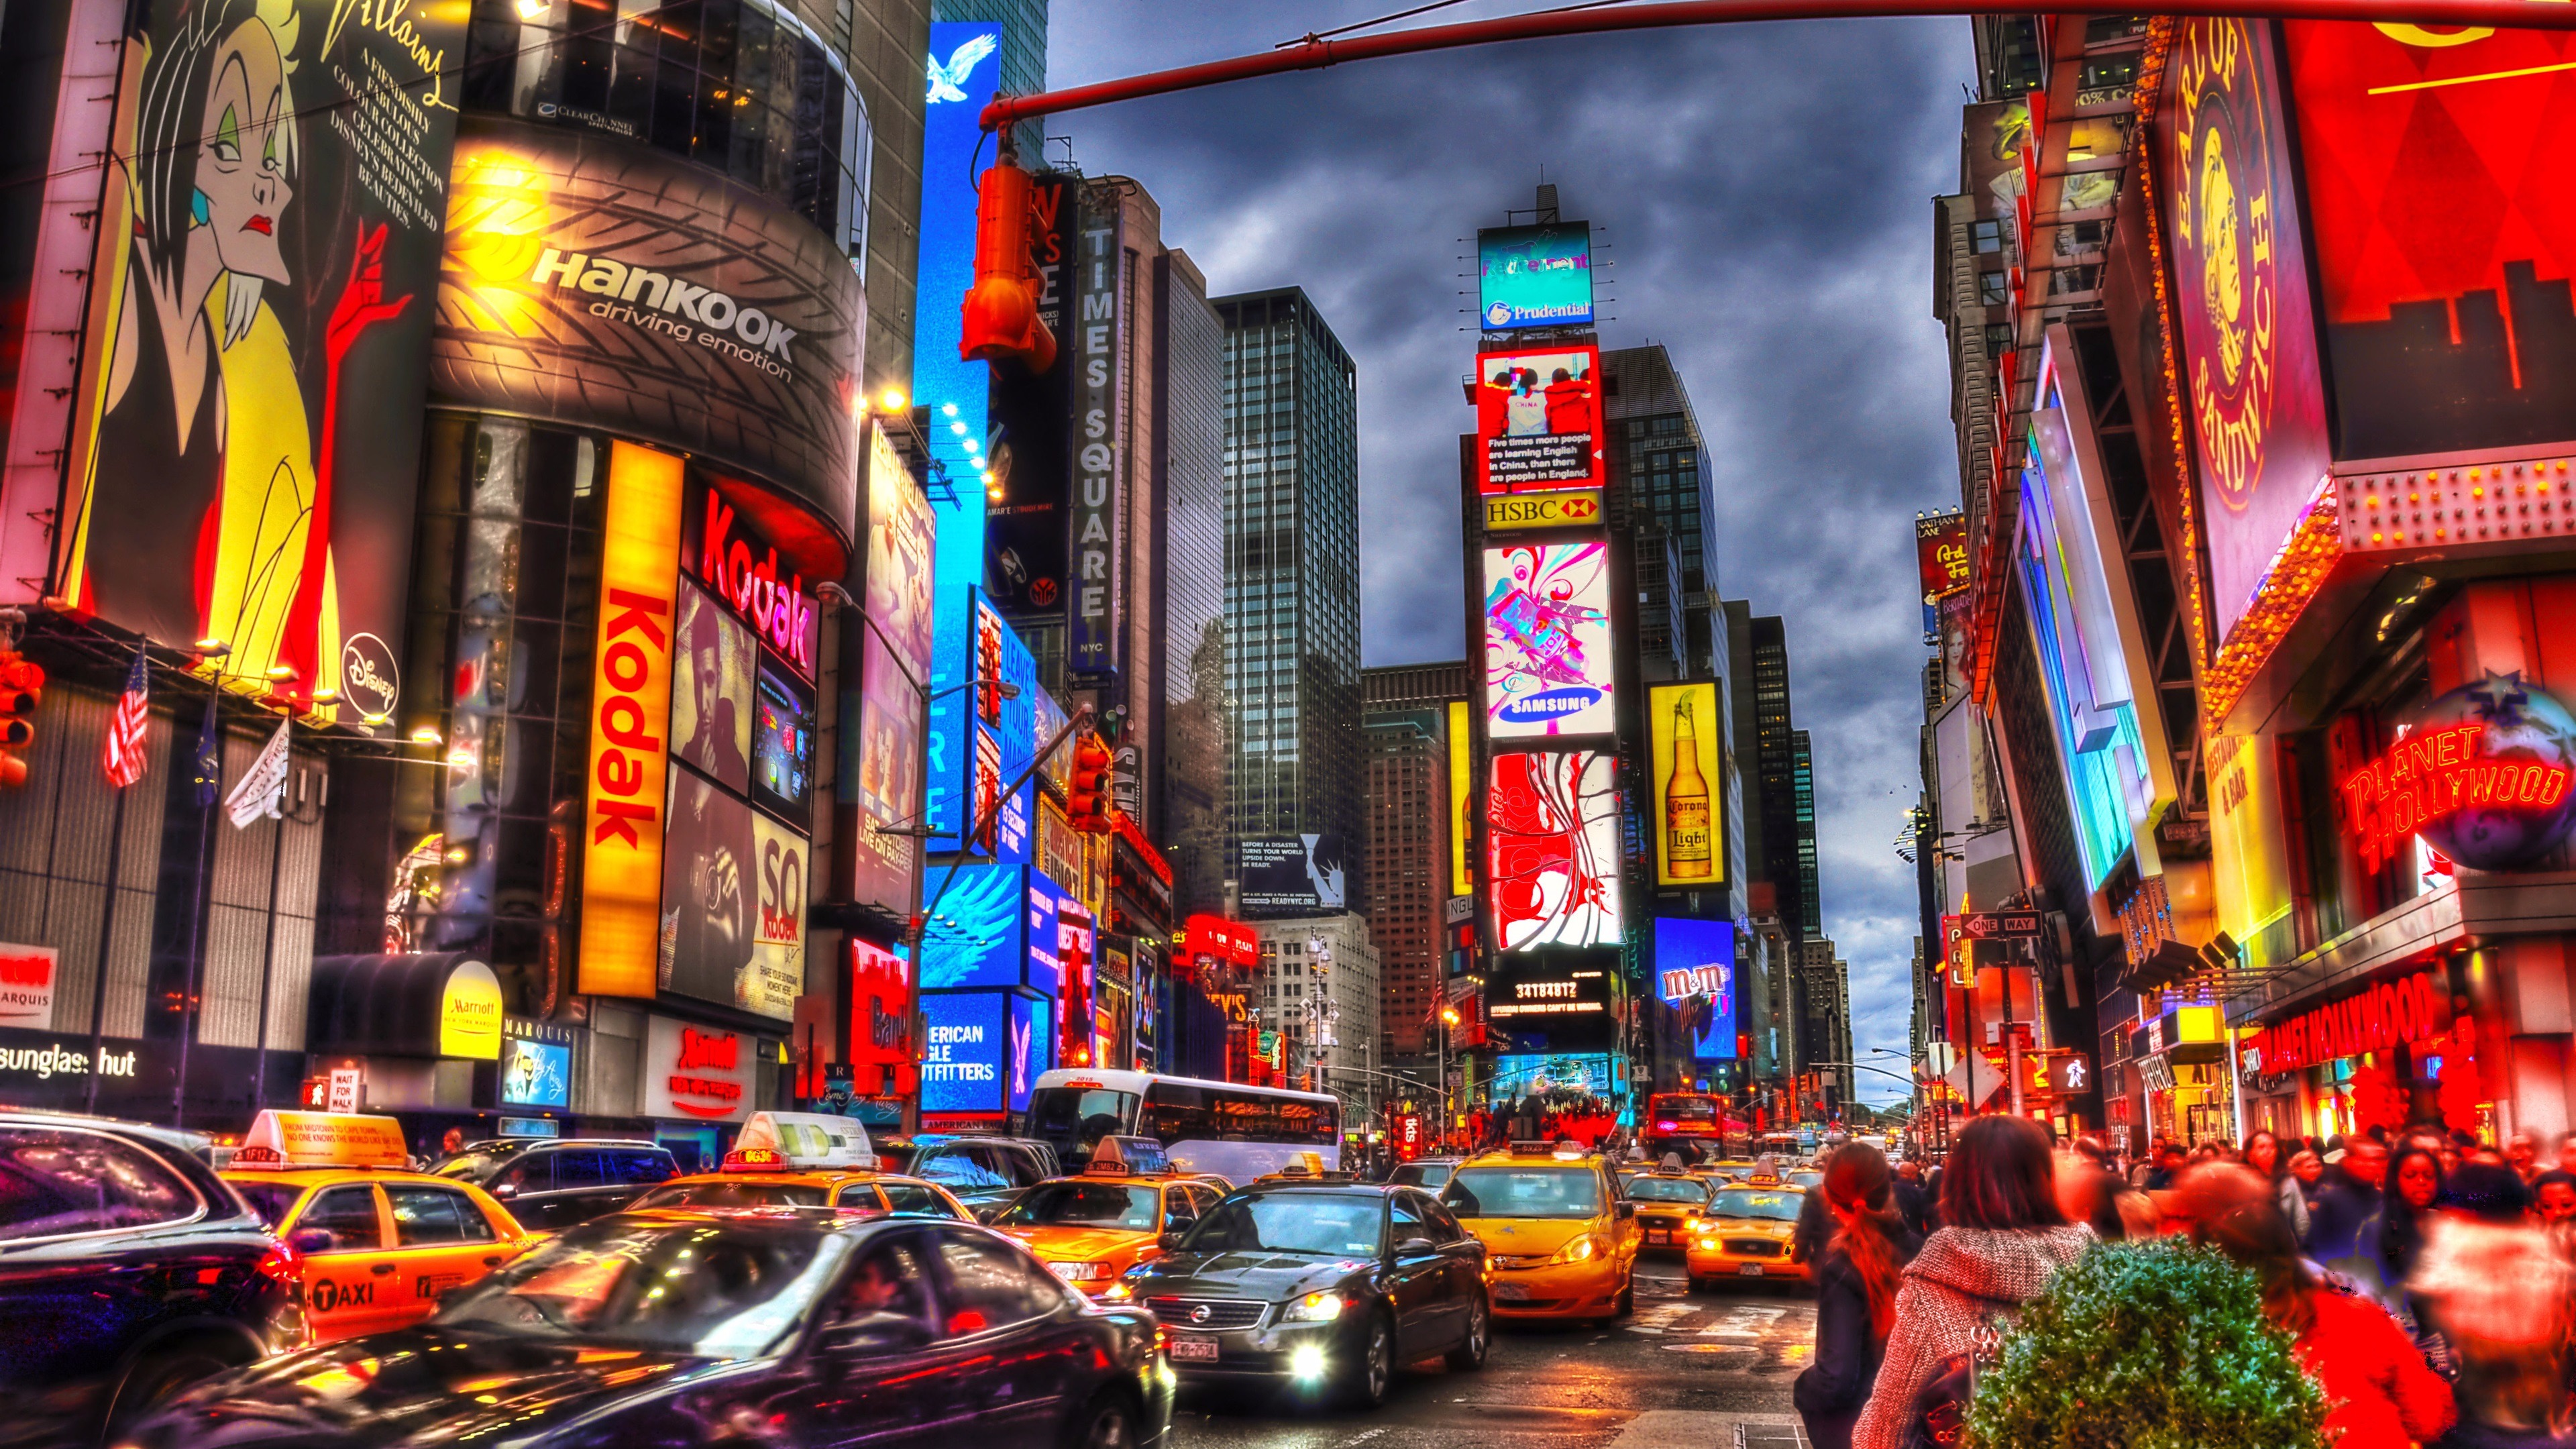 new york, colorful, man made, times square, building, city, colors, night, skyscraper 8K